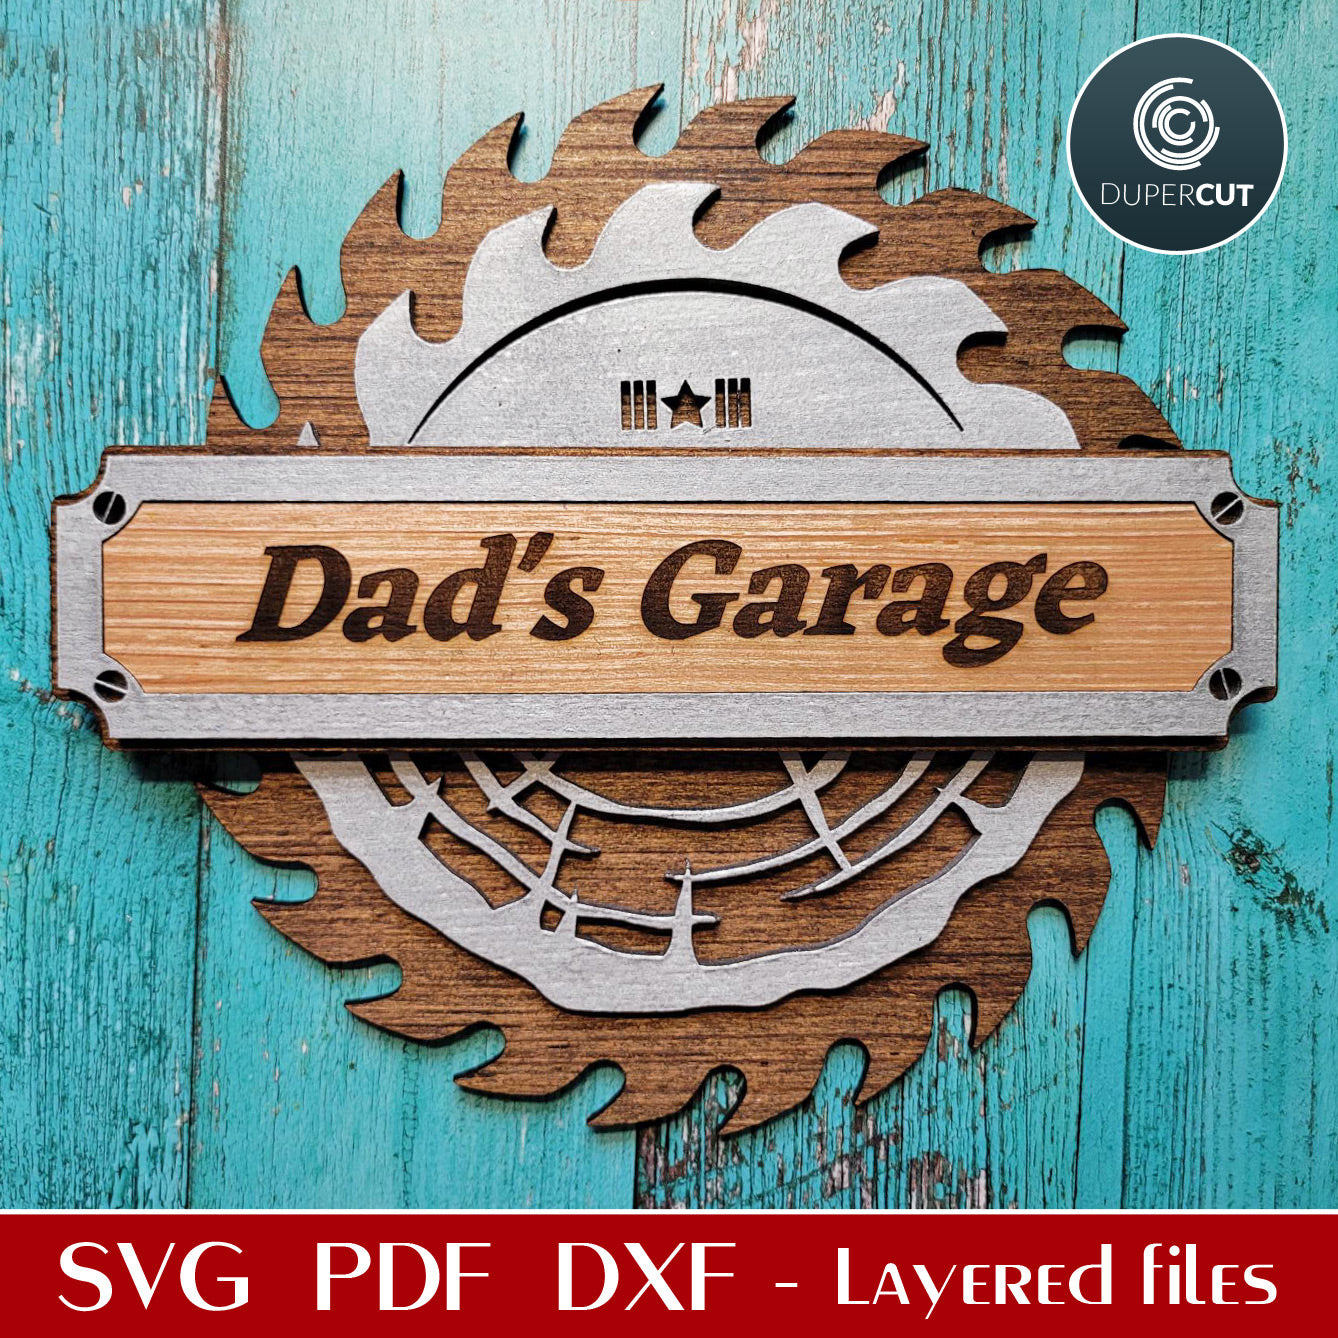 Personalized Garage sign father's day gift - SVG PDF DXF layered cutting files for laser and digital machines, Glowforge, Silhouette Cameo, Cricut, CNC plasma machines by www.DuperCut.com